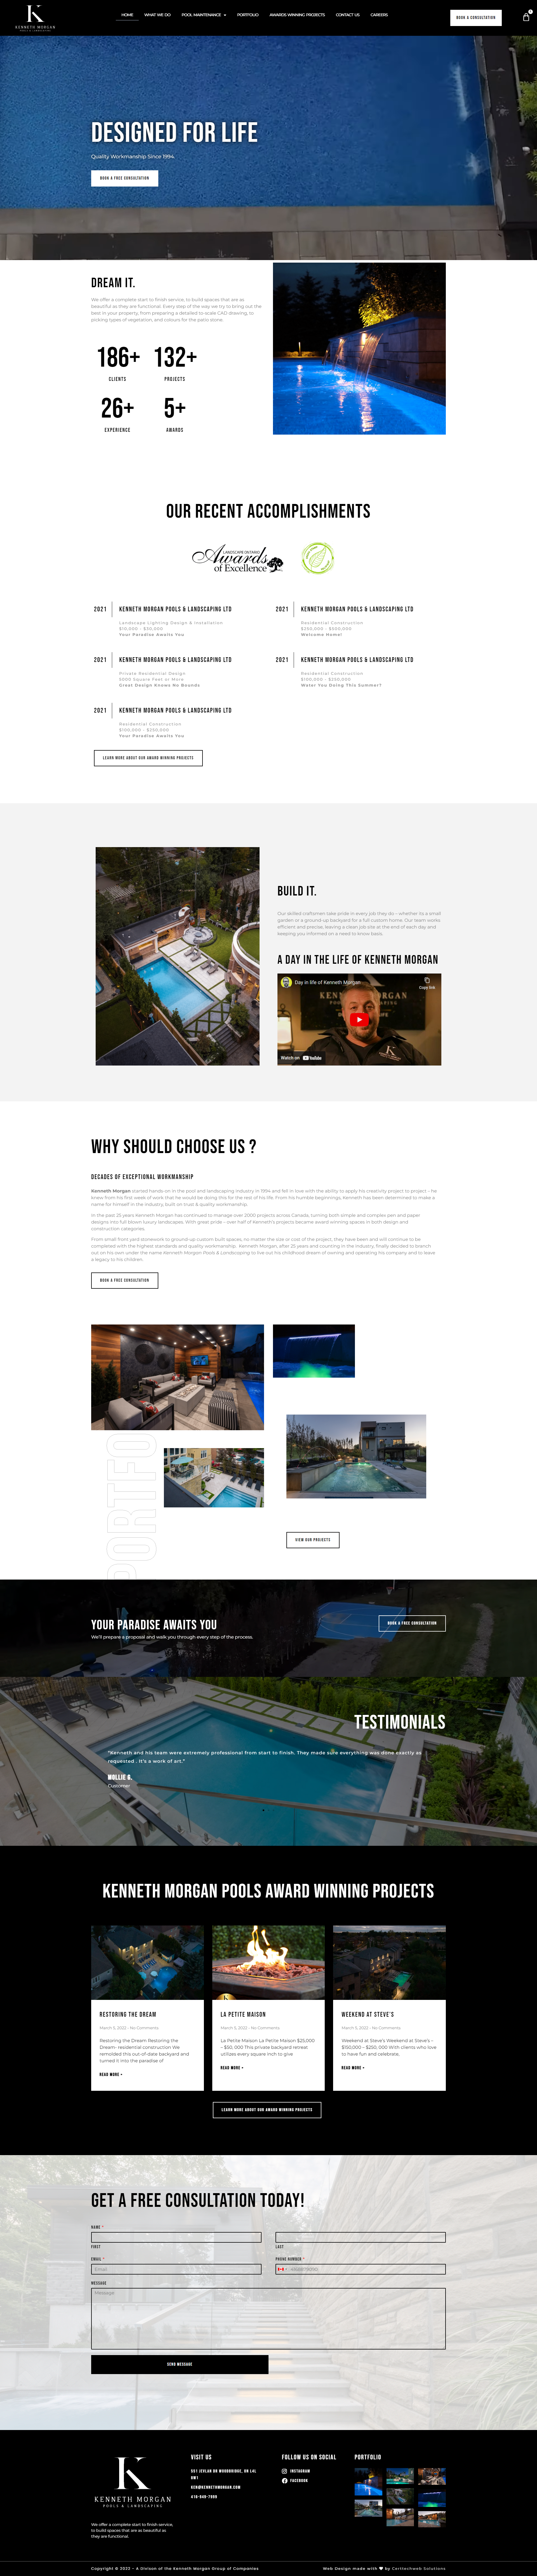 A website design for a swimming pool company.